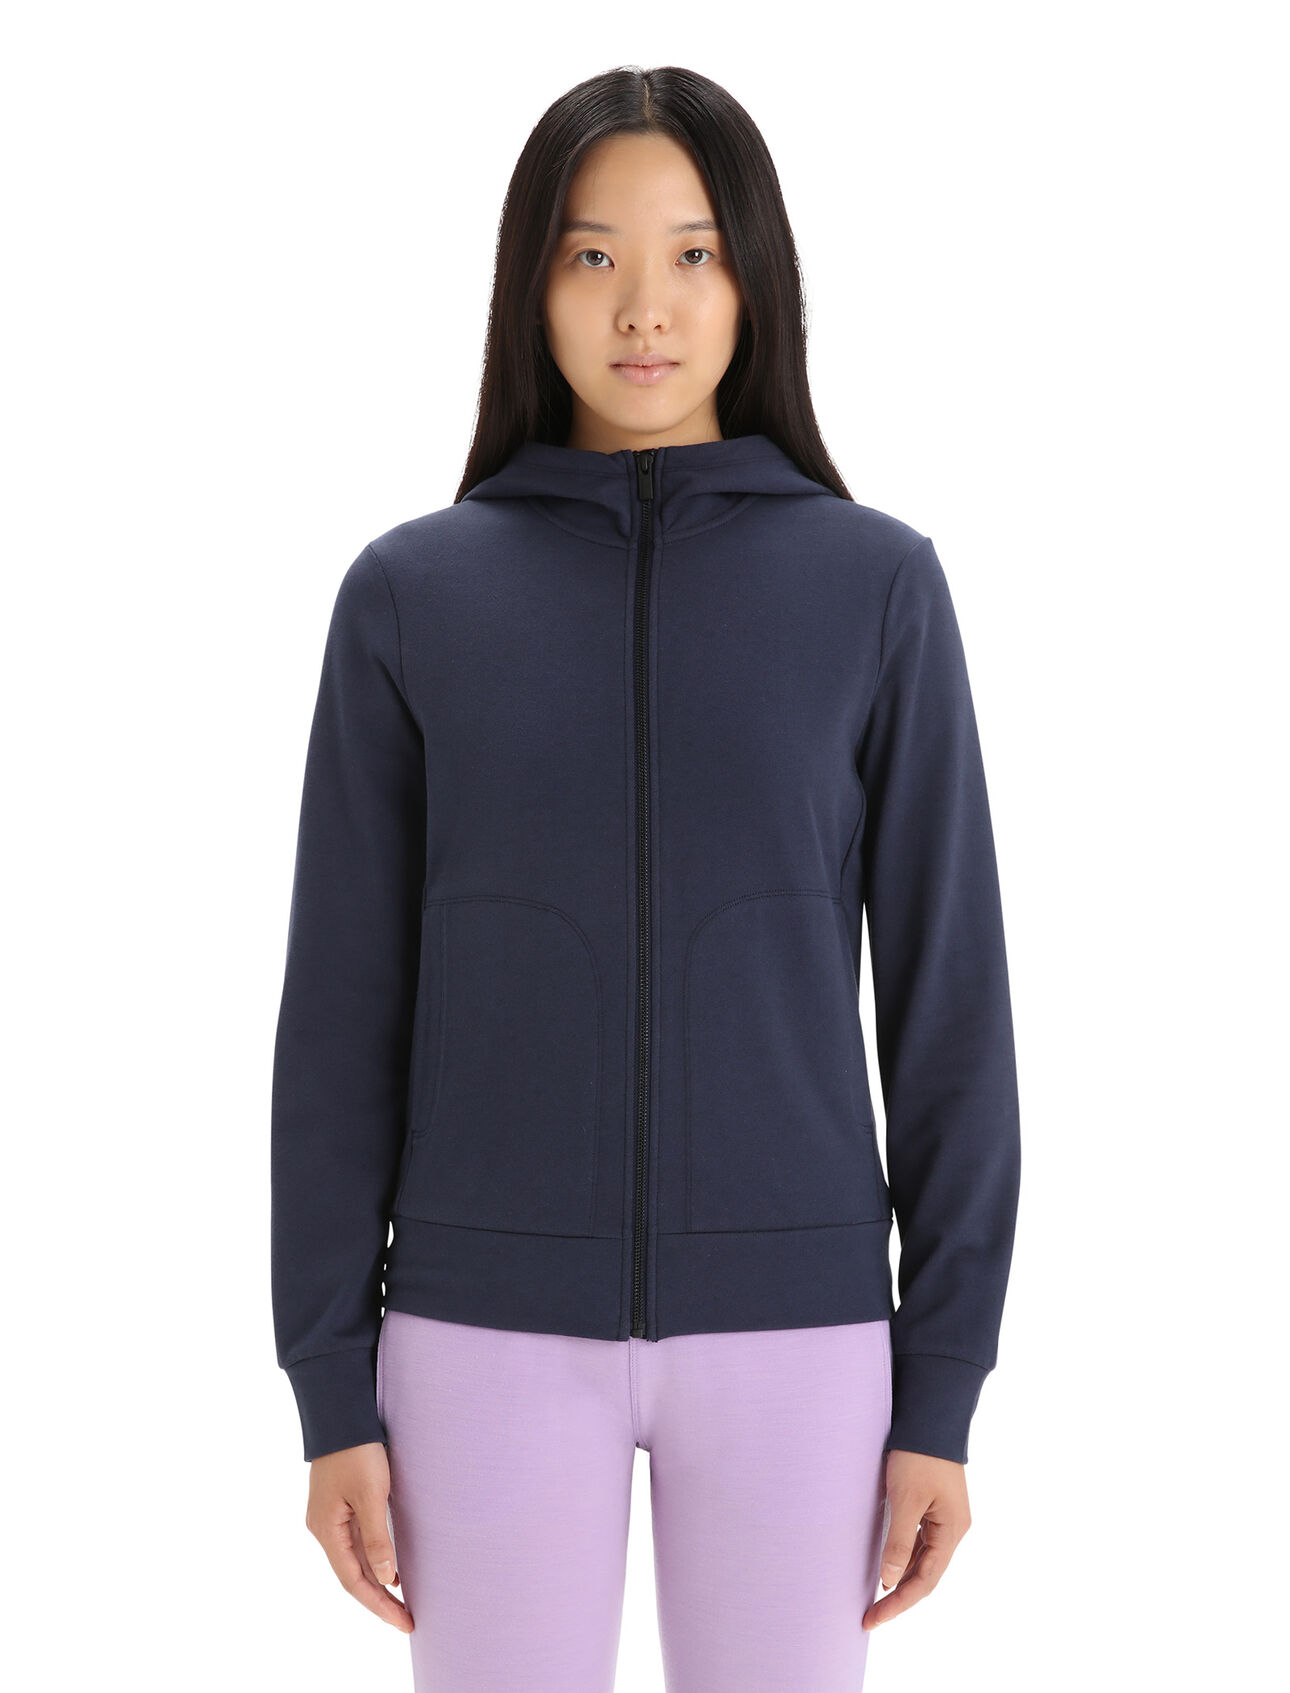 Womens Merino Central Classic Long Sleeve Zip Hoodie A comfy, classic and stylish everyday hooded sweatshirt that blends natural merino wool with organically grown cotton, the Central Classic Long Sleeve Zip Hoodie is durable, breathable and incredibly versatile.  